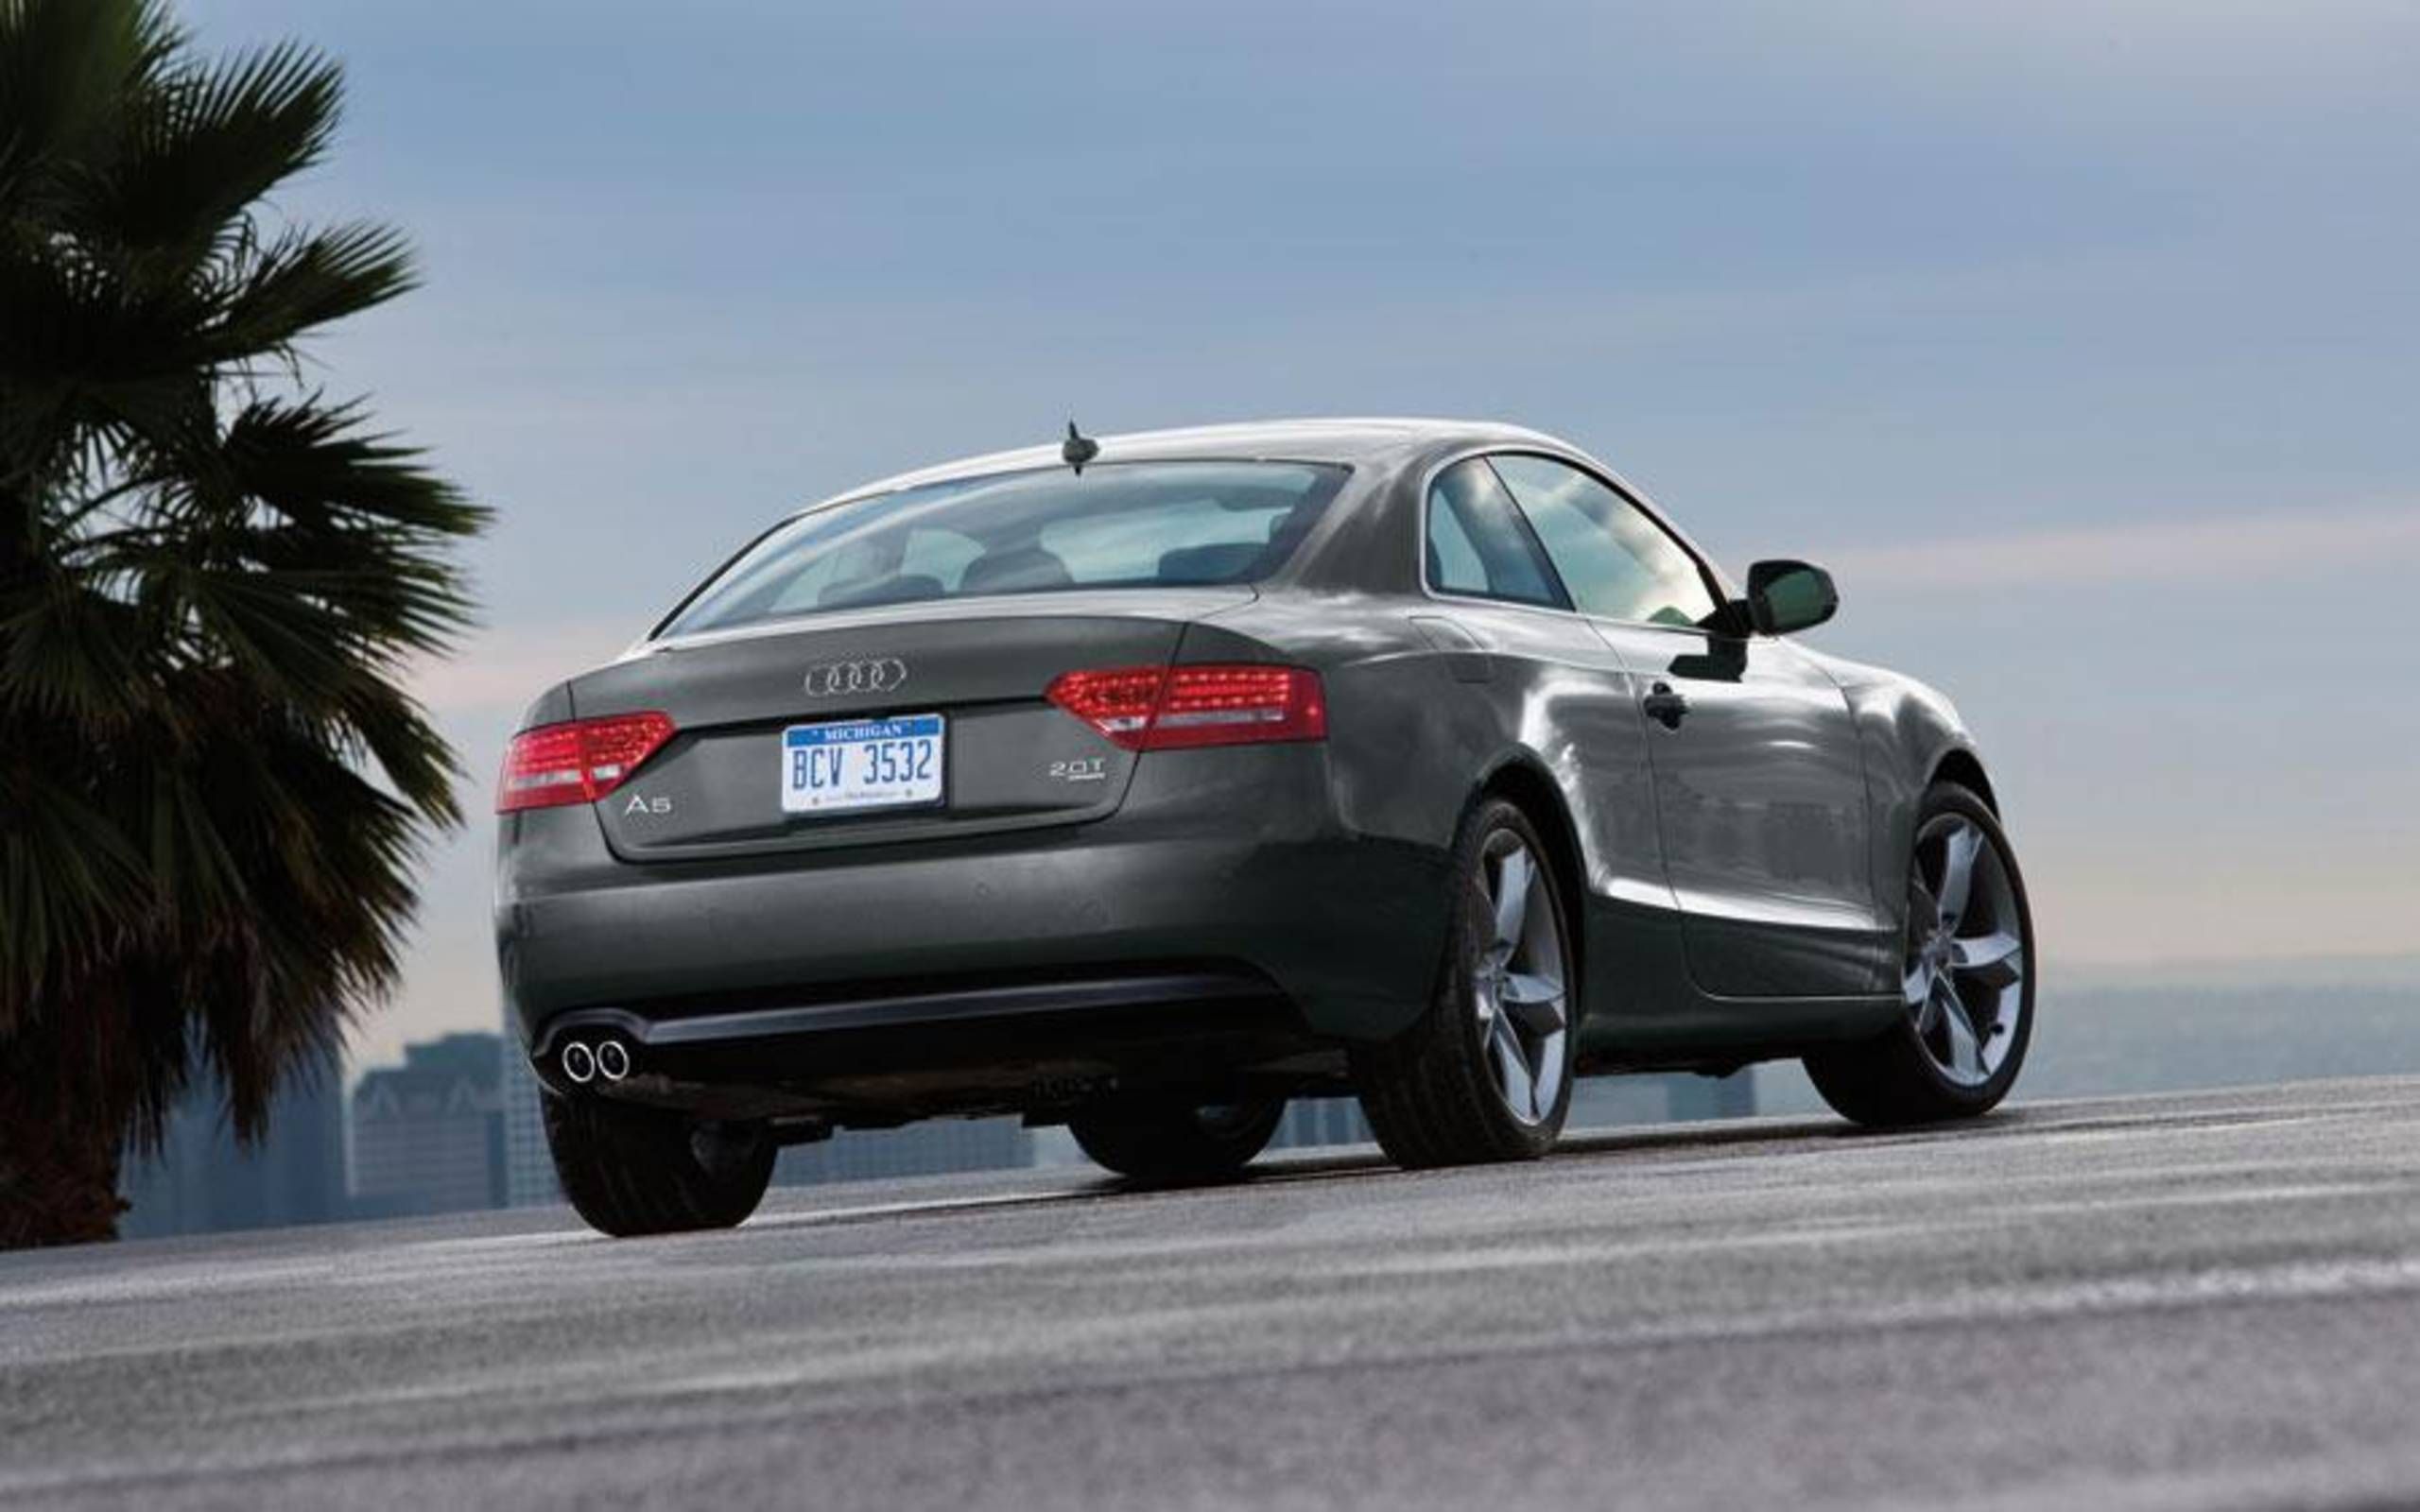 2012 Audi A5 2.0 TFSI review notes: A handsome and sporty luxury coupe